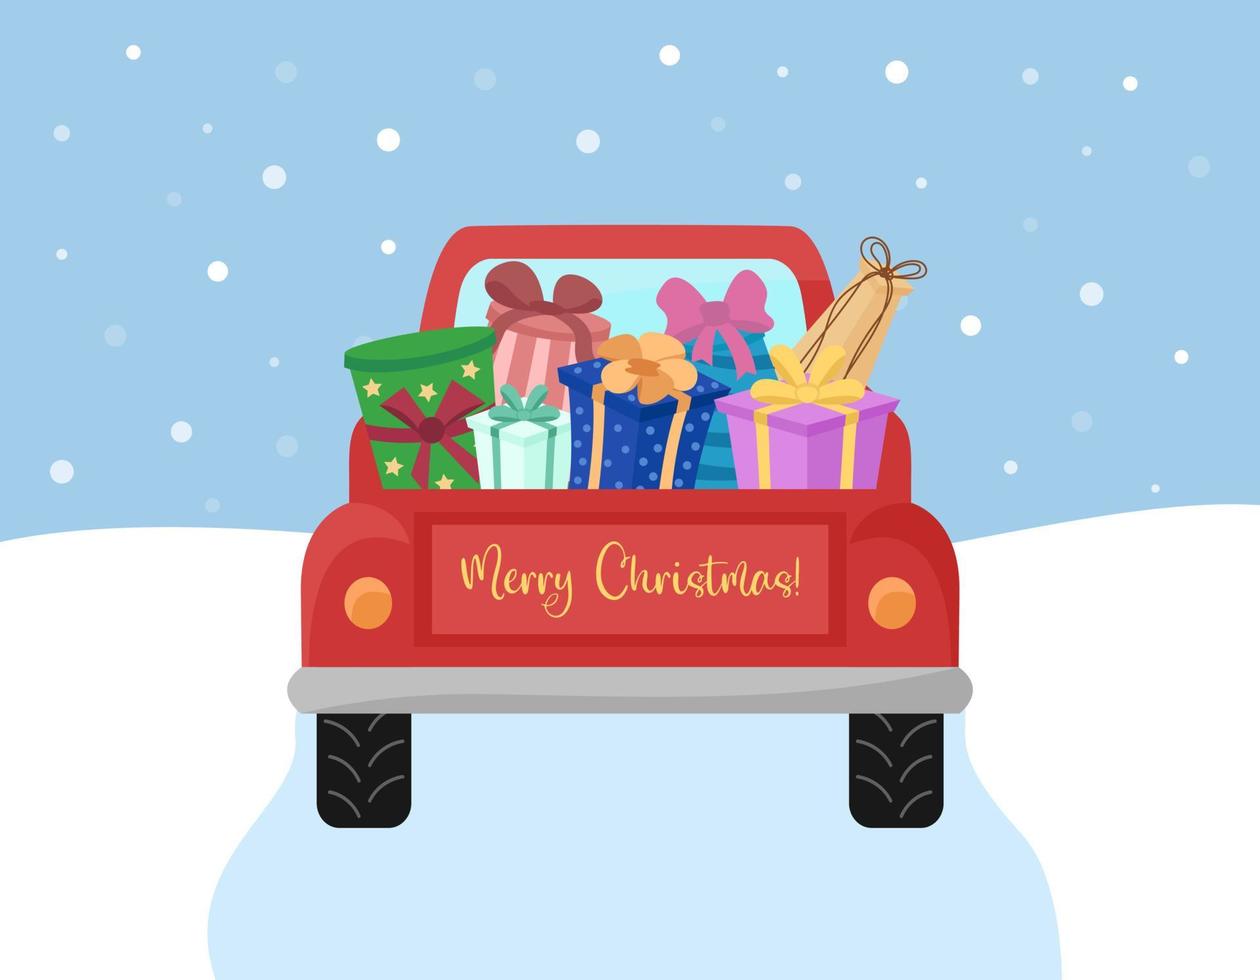 Red truck car carrying gifts. Rear view. Merry Christmas text. Snow falling. Its time to buy presents. Vector concept illustration.